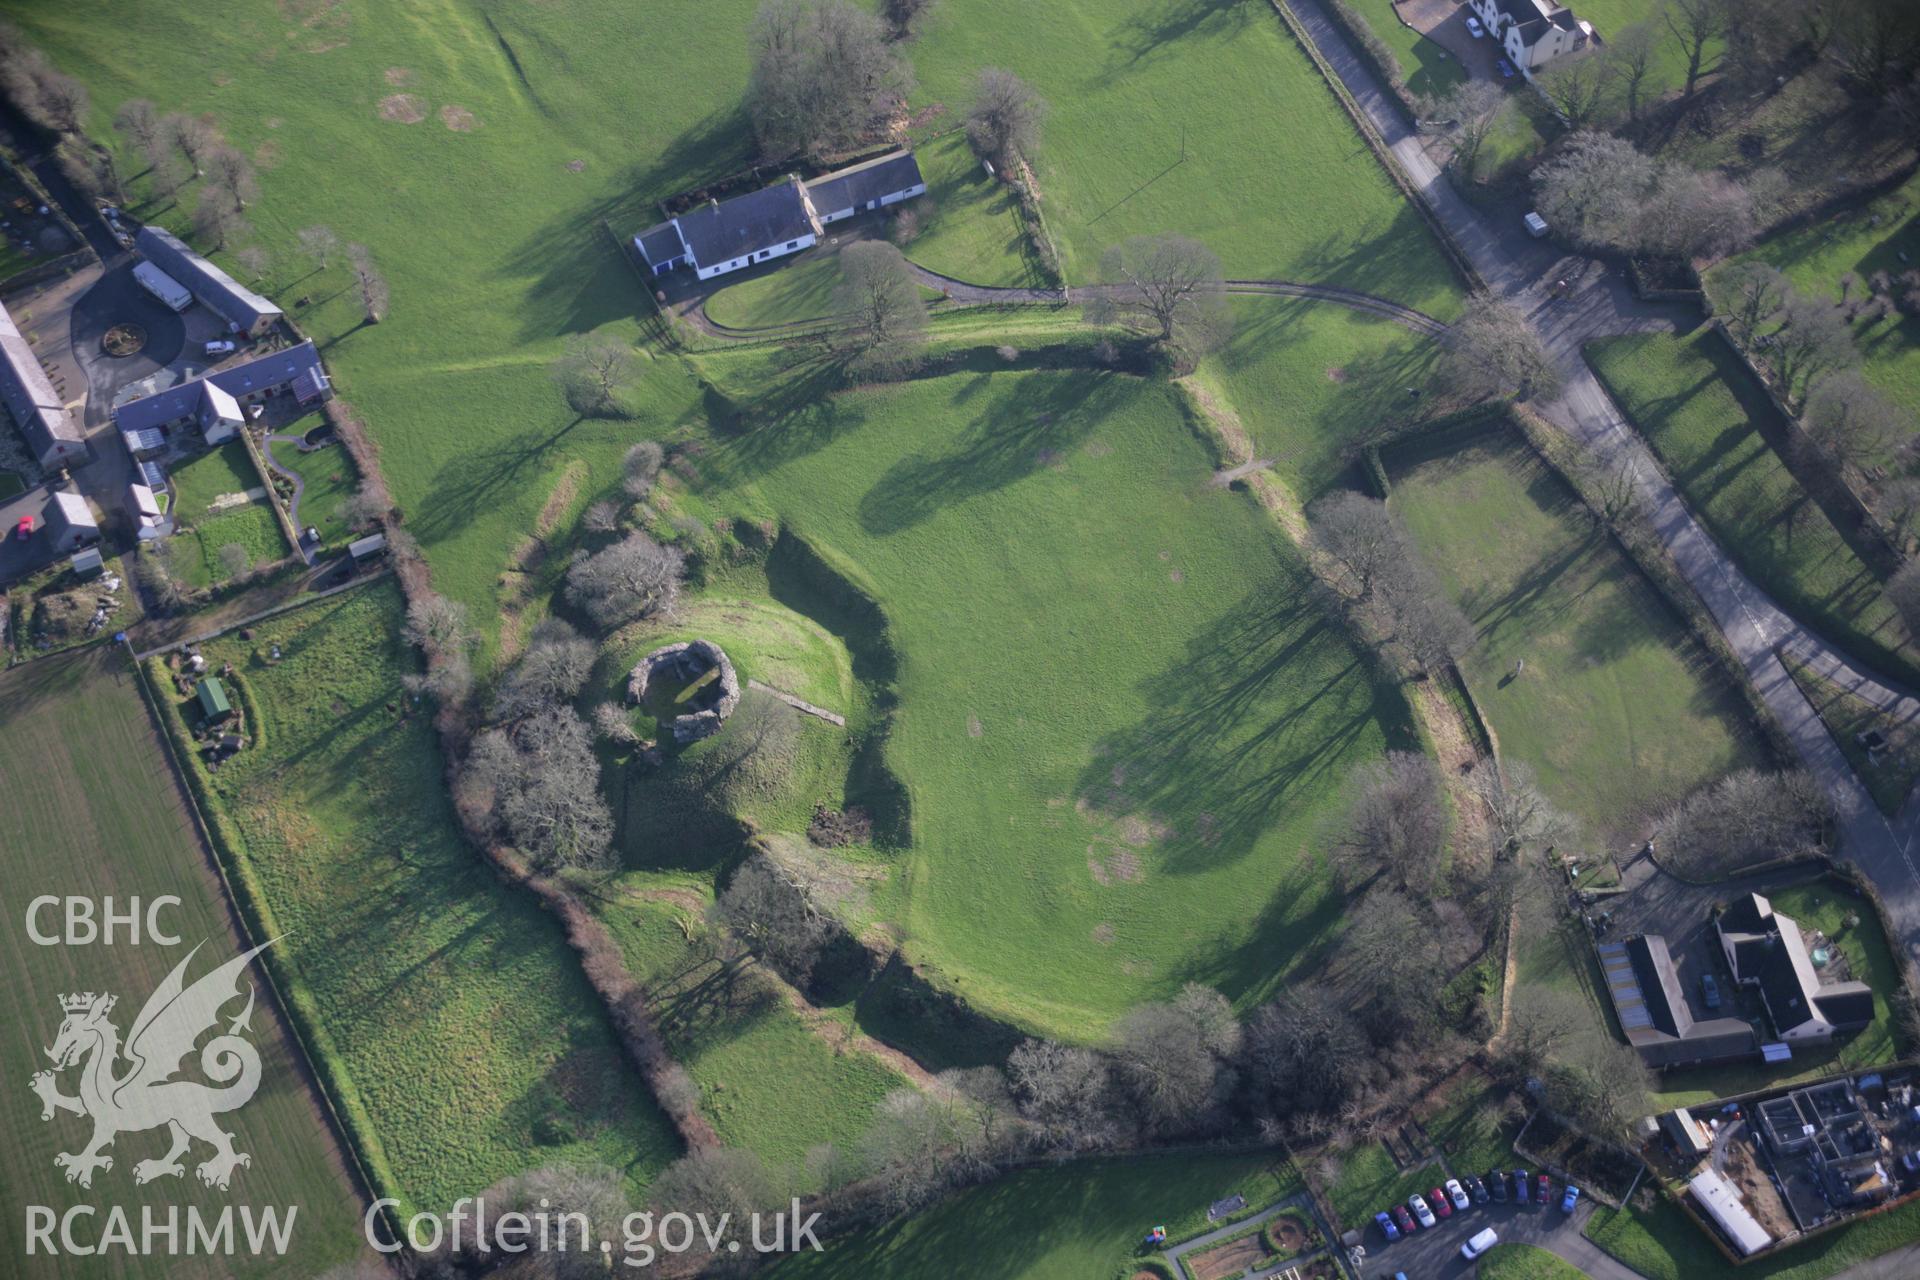 RCAHMW colour oblique aerial photograph of Wiston Castle from the west. Taken on 11 January 2006 by Toby Driver.